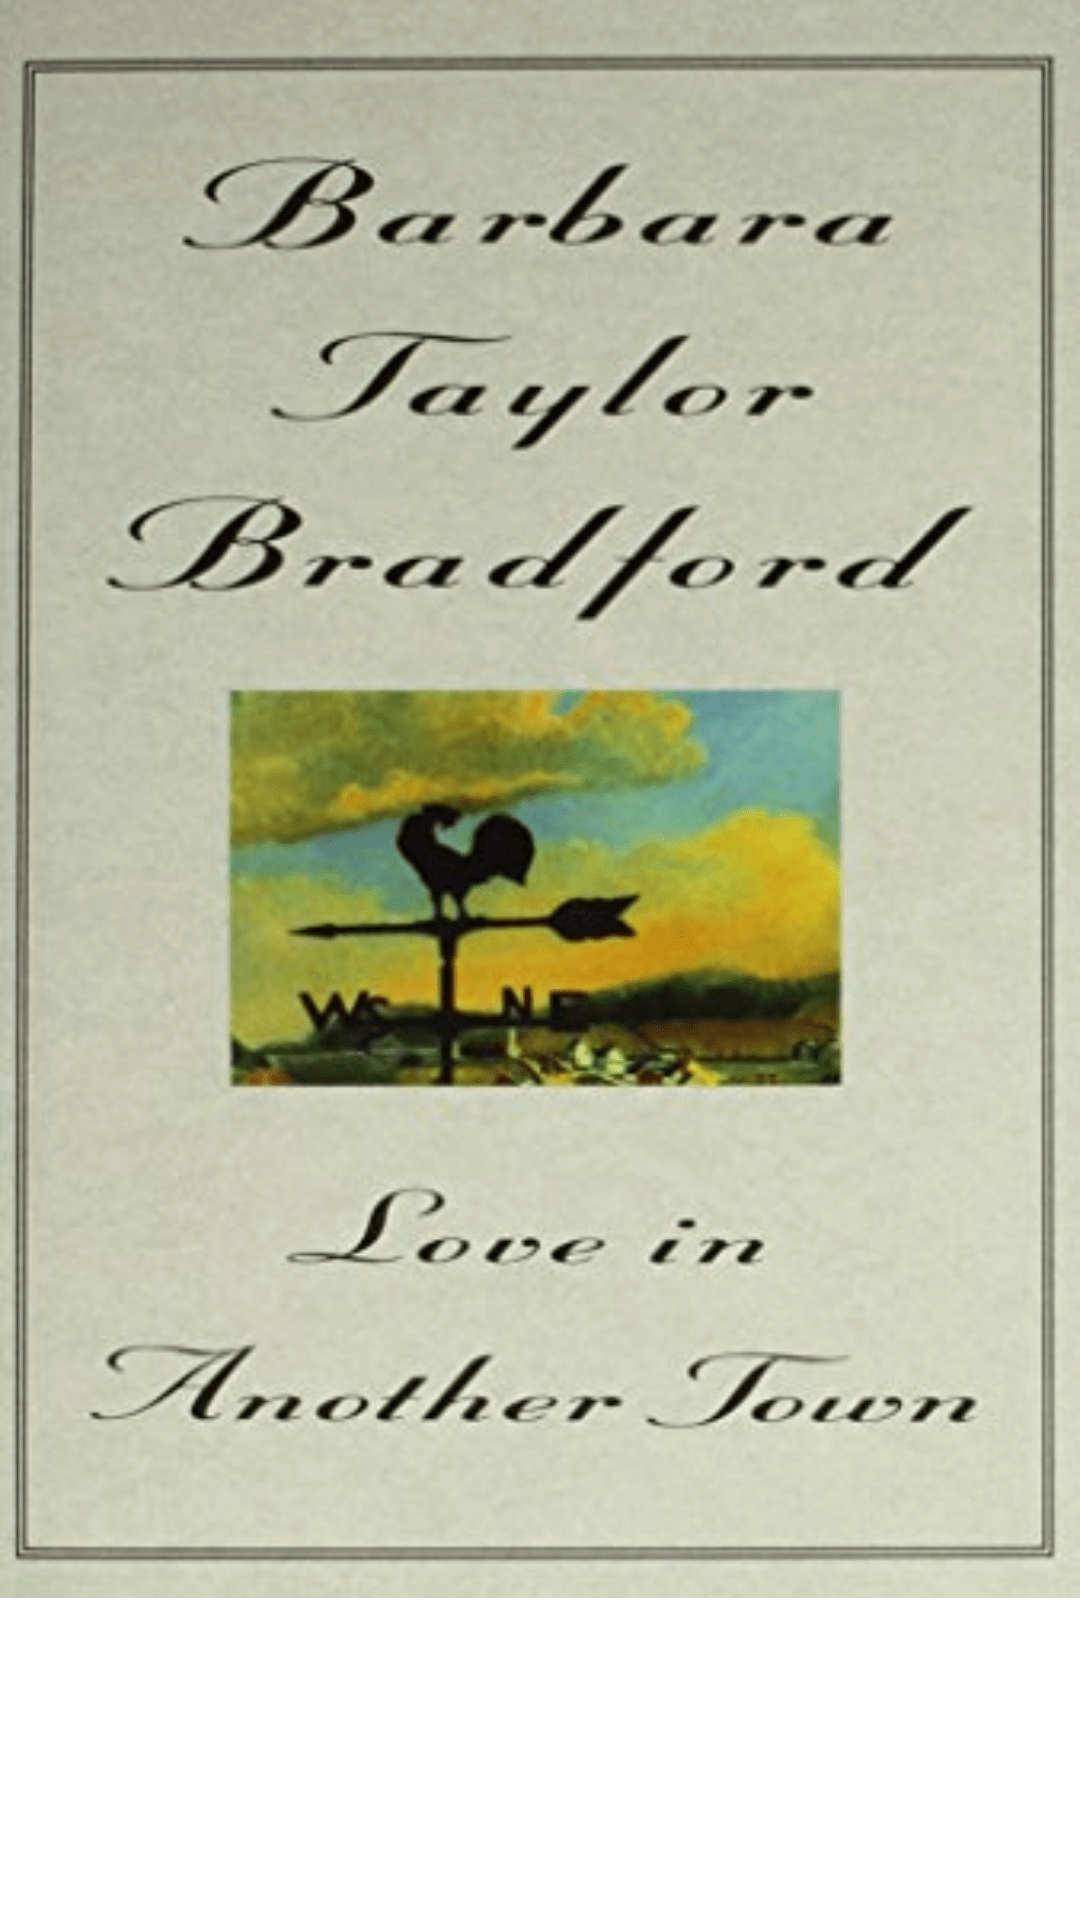 Love in Another Town by Barbara Taylor Bradford